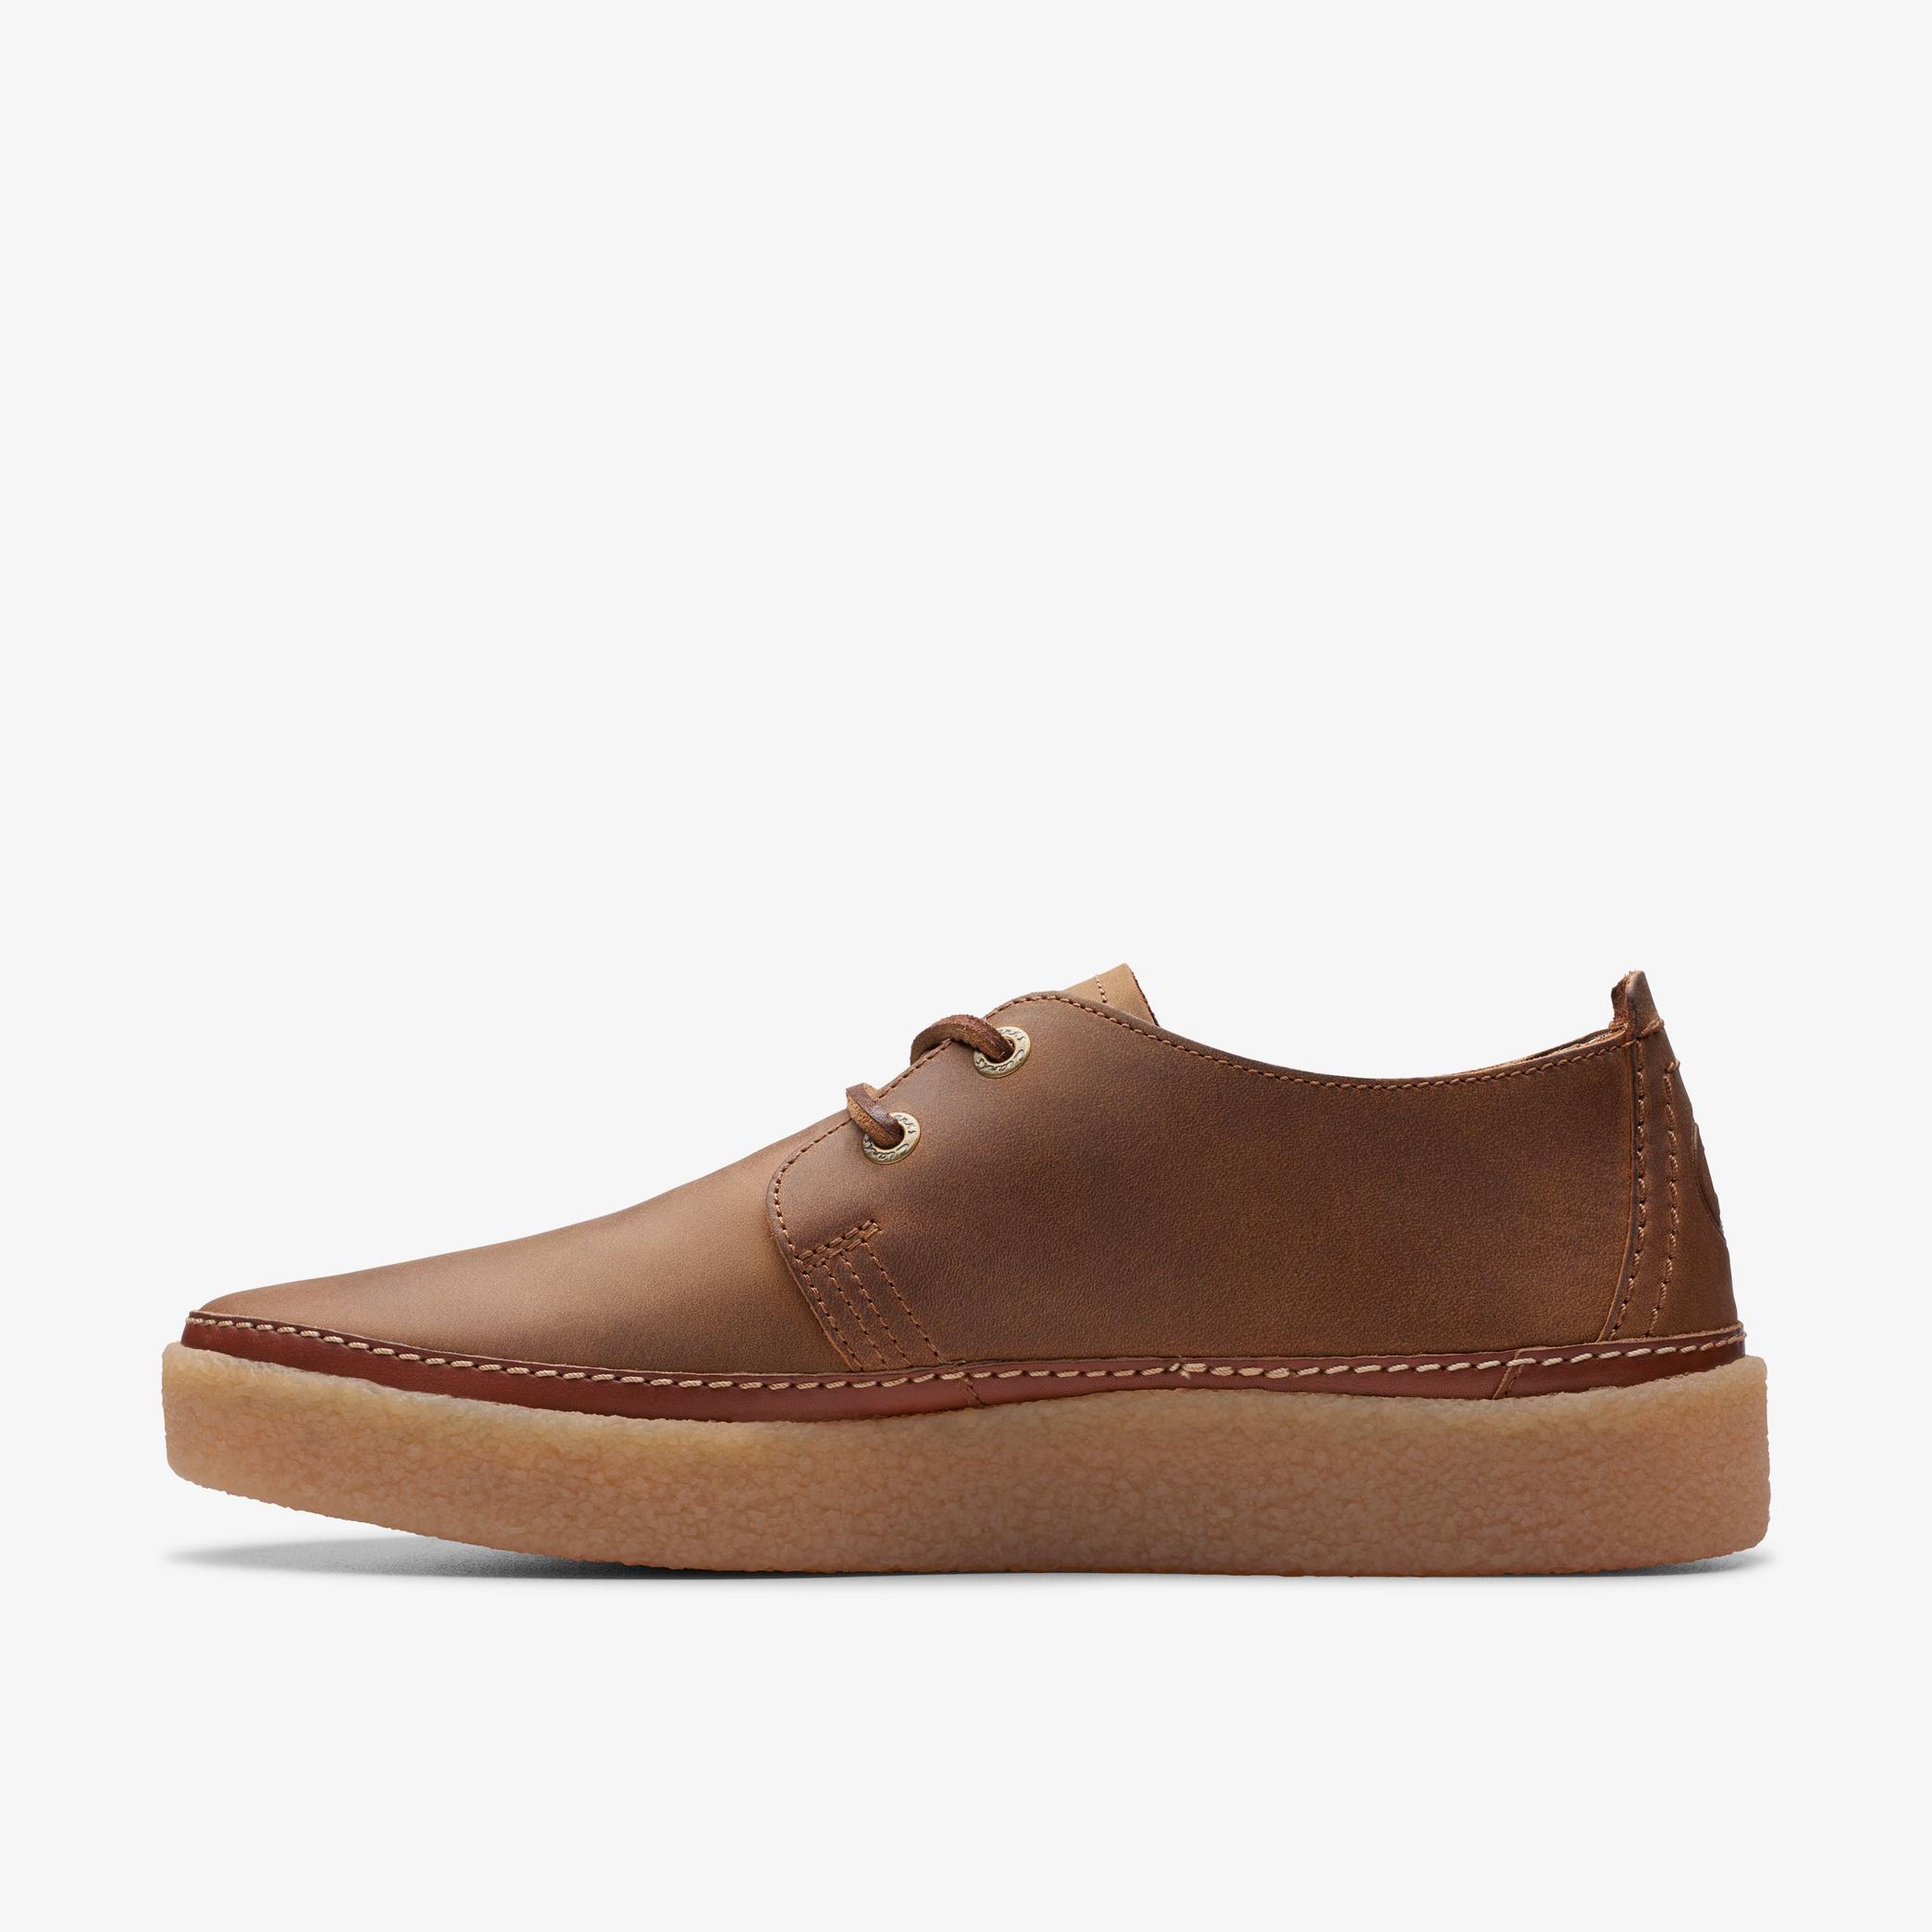 Mens Clarkwood Low Beeswax Leather Shoes | Clarks UK